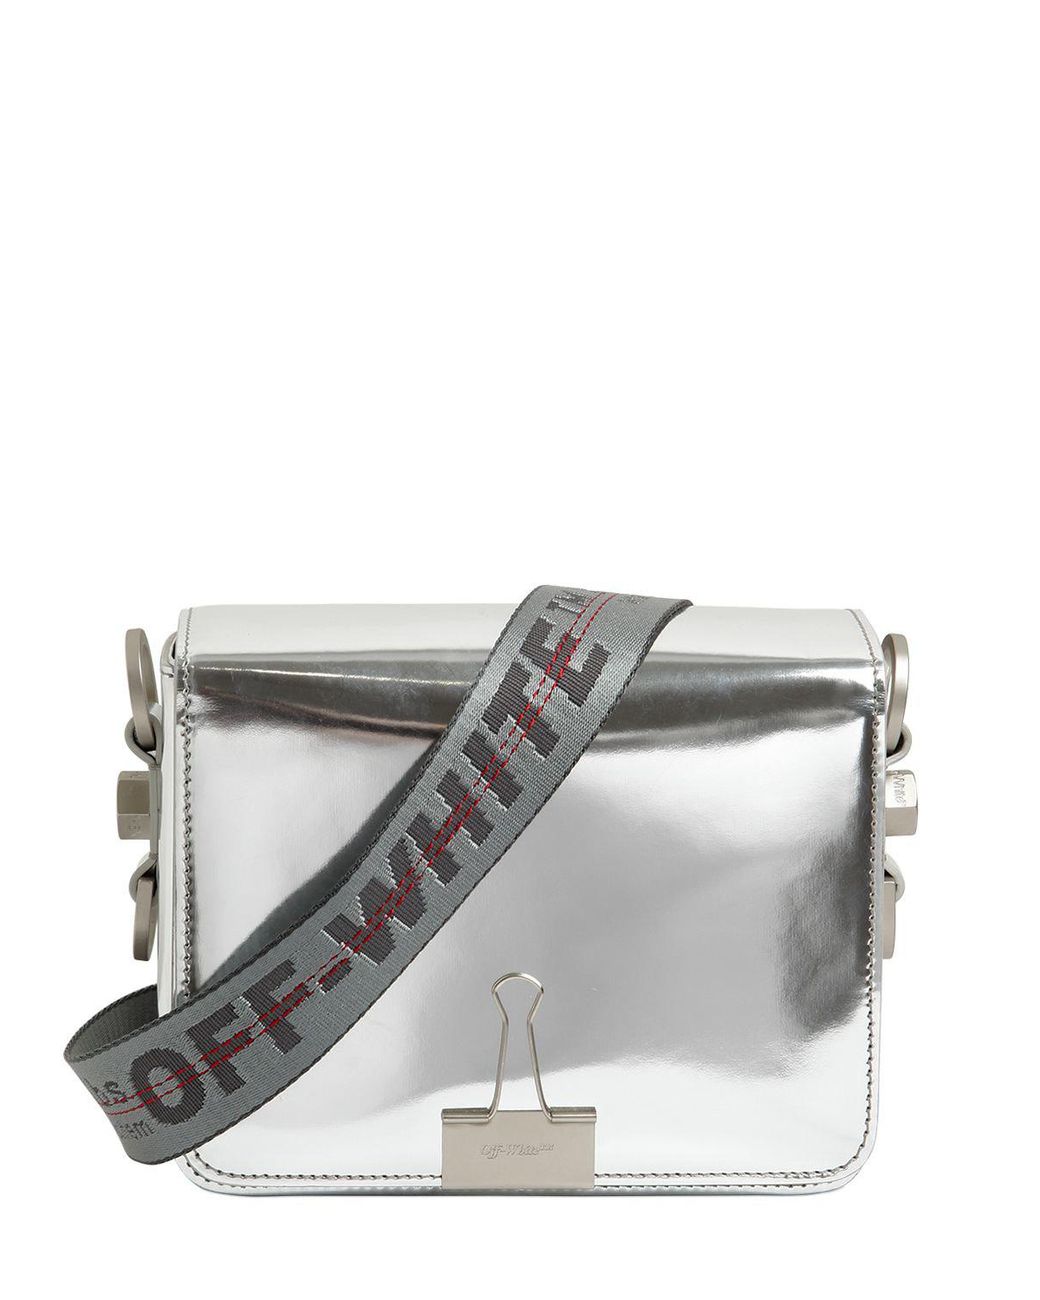 Binder patent leather crossbody bag Off-White Metallic in Patent leather -  23364554